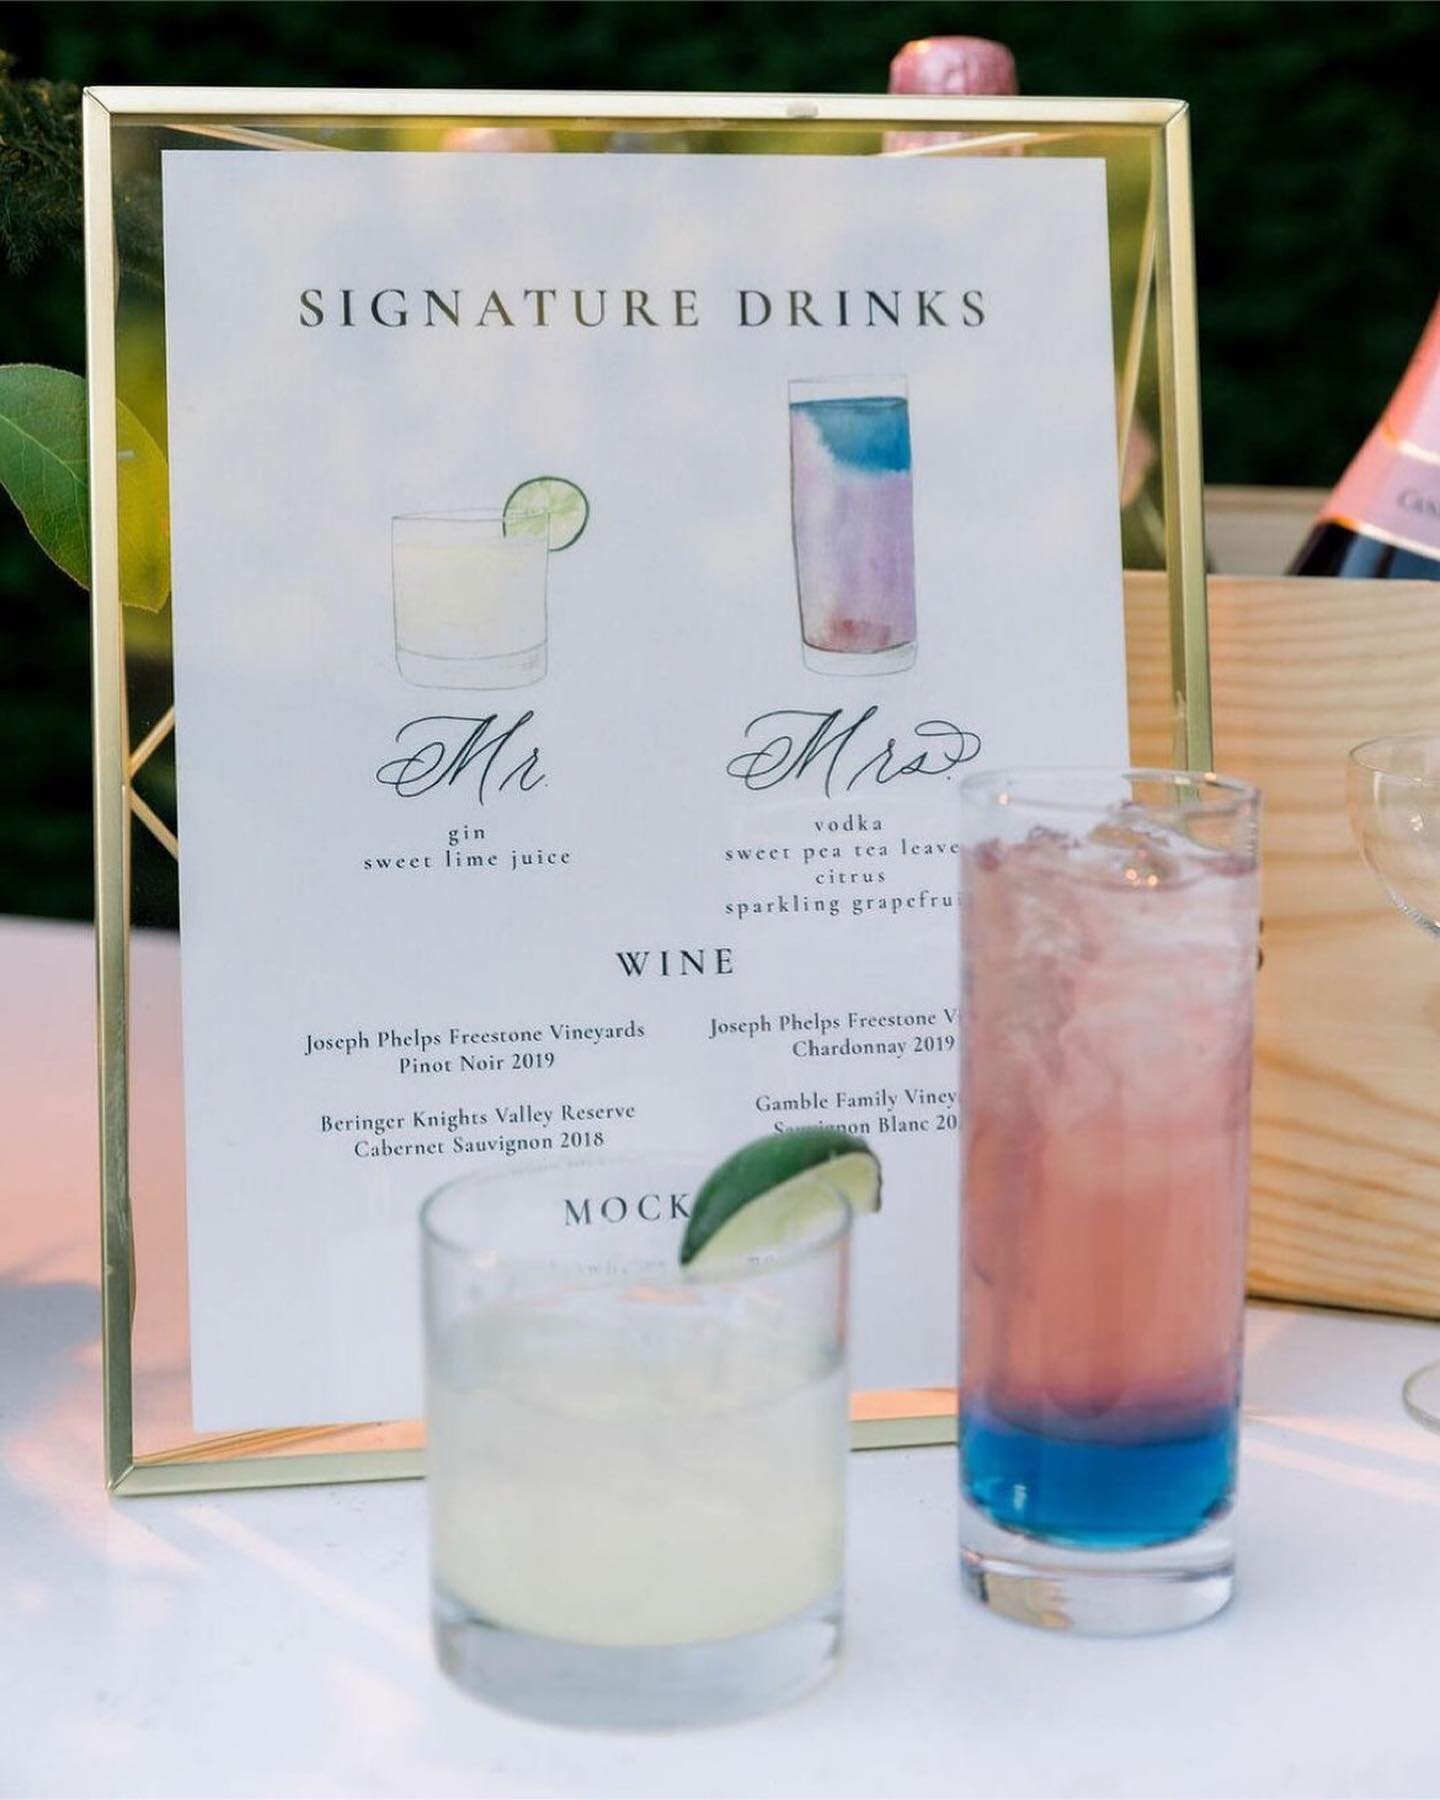 Signature drinks at a wedding are such a good way to add more personality to your day and make it more fun. Cheers

Photography @photographerinparis 
Wedding Design @alafrancaiseevents
Coordination @prettyoccasions
Videography @amorinmotion
Beauty @t